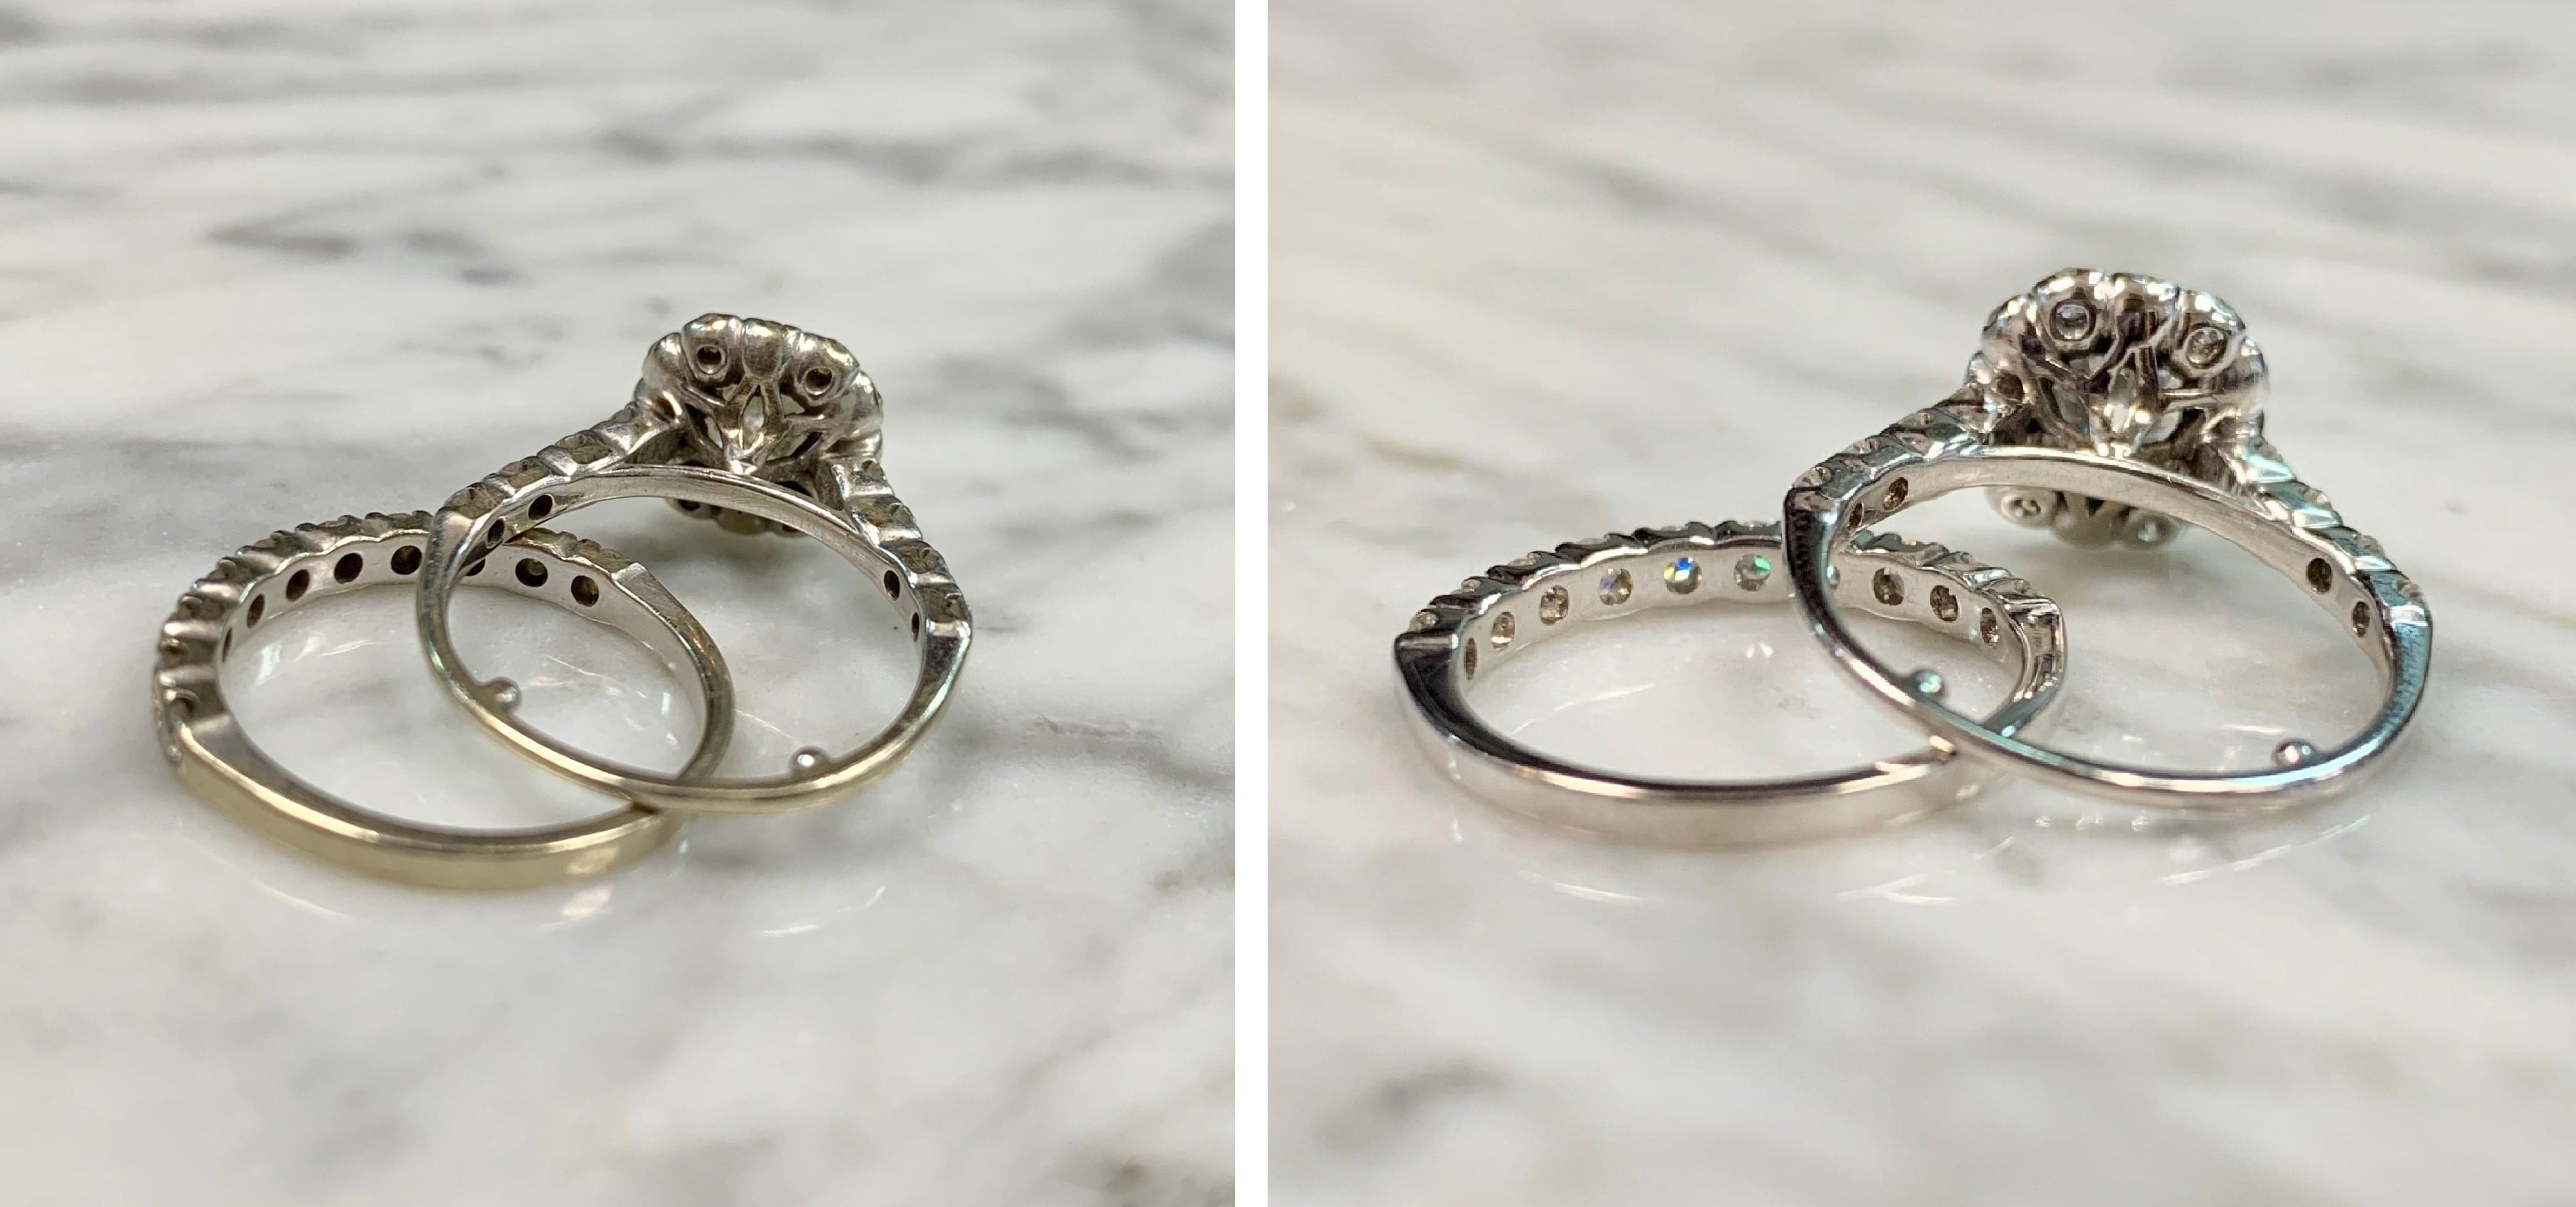 The before and after polish and rhodium of a wedding ring set